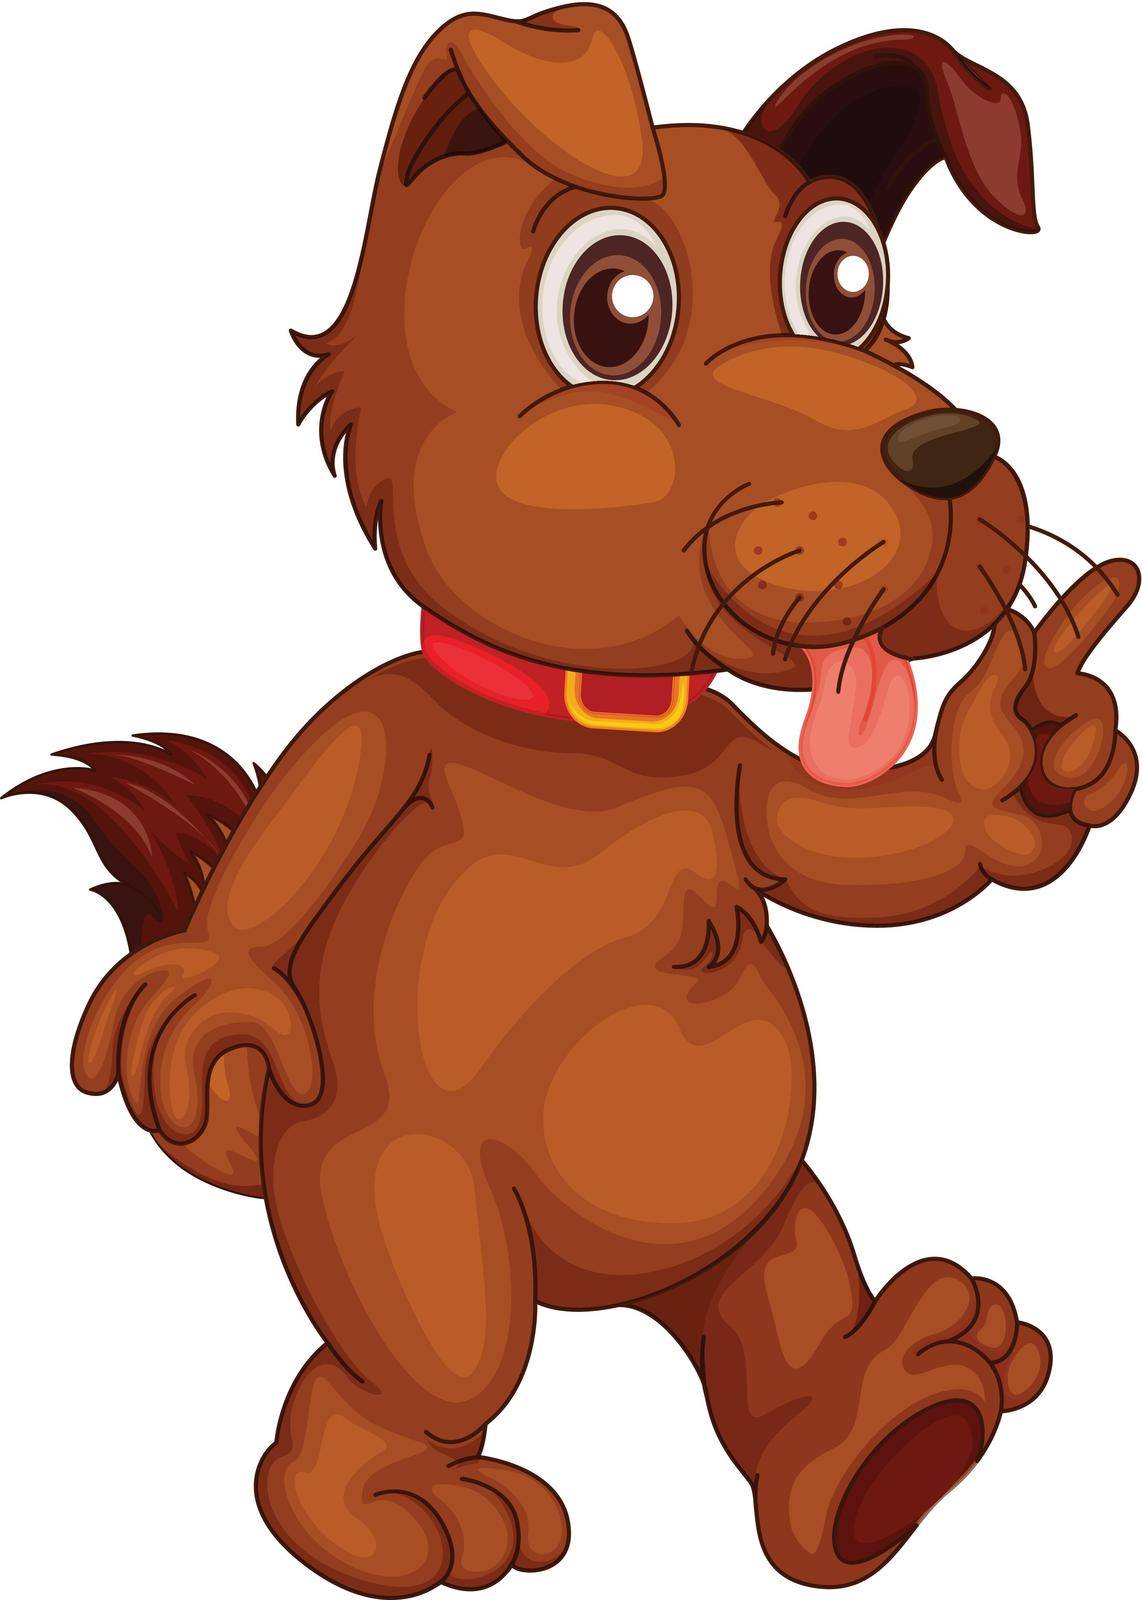 Illustration of a single cute dog in cartoon style